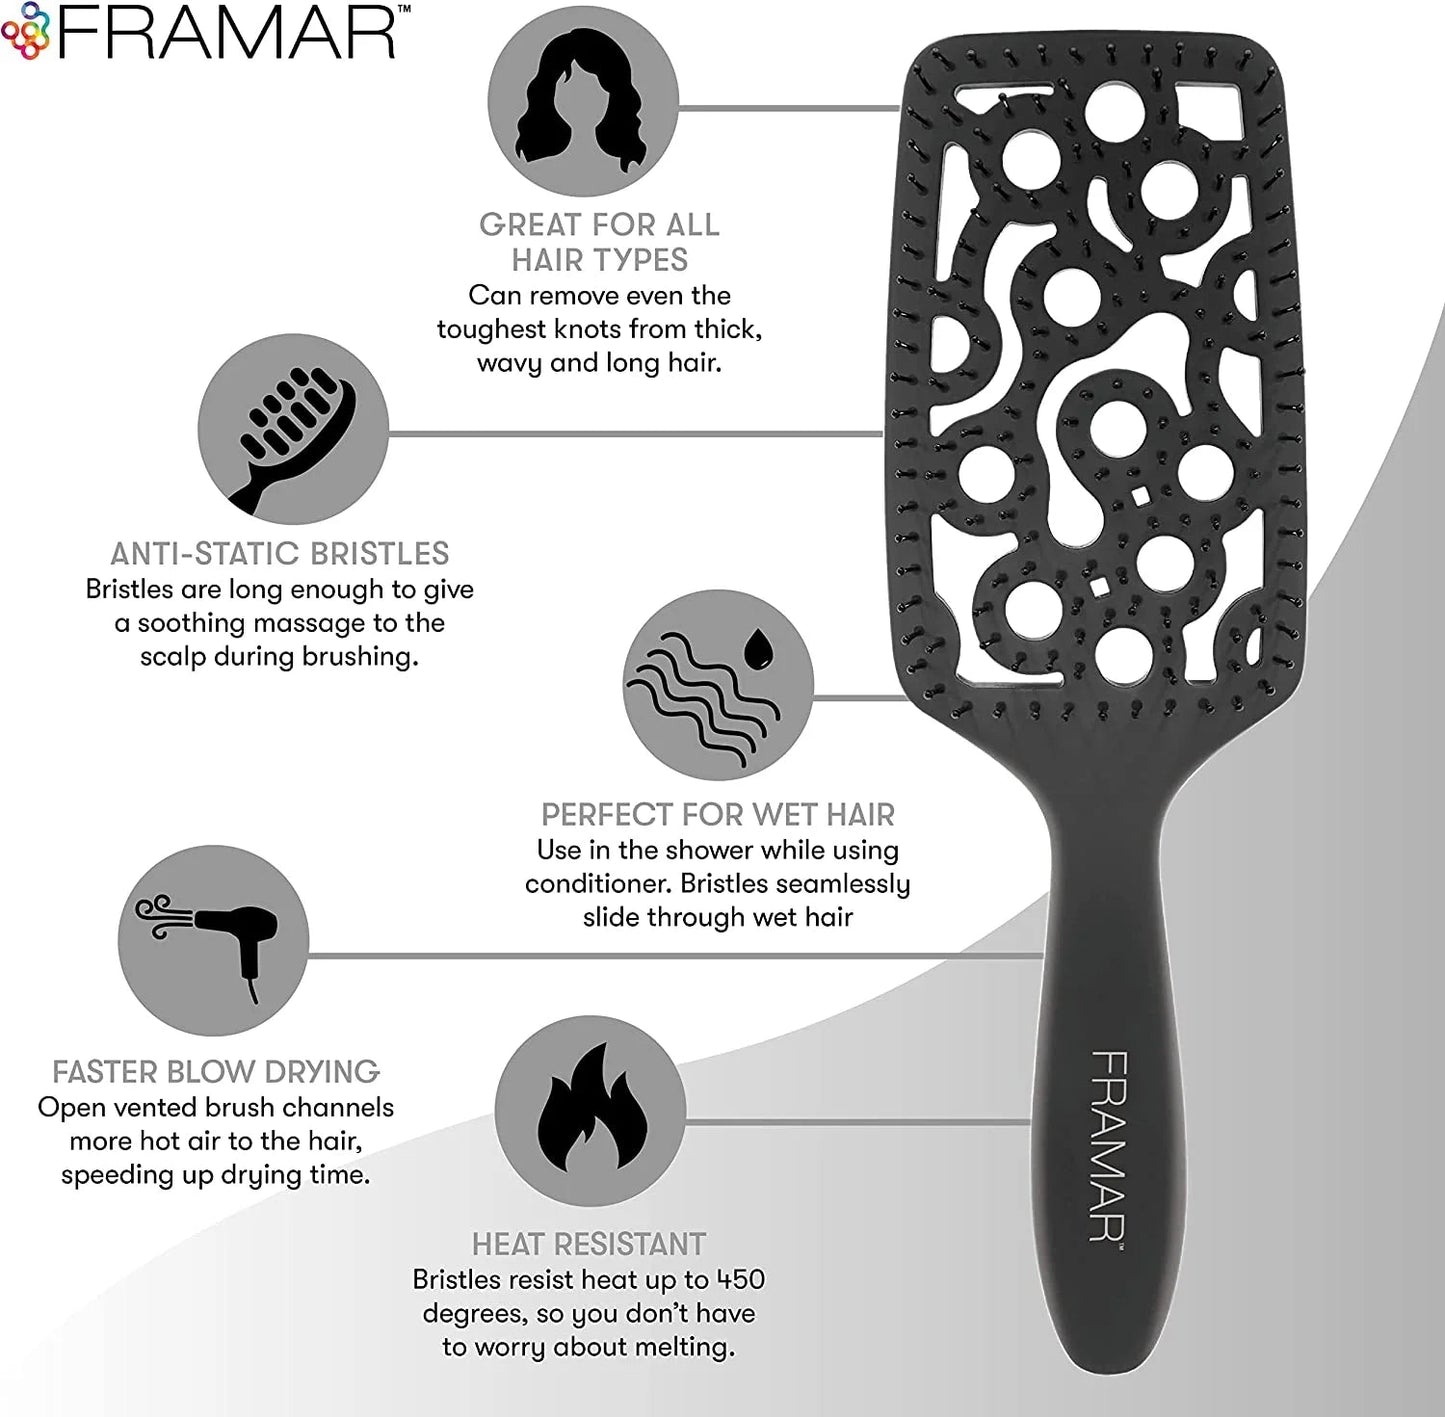 Framar - Air Vent Brush - I Need To Vent